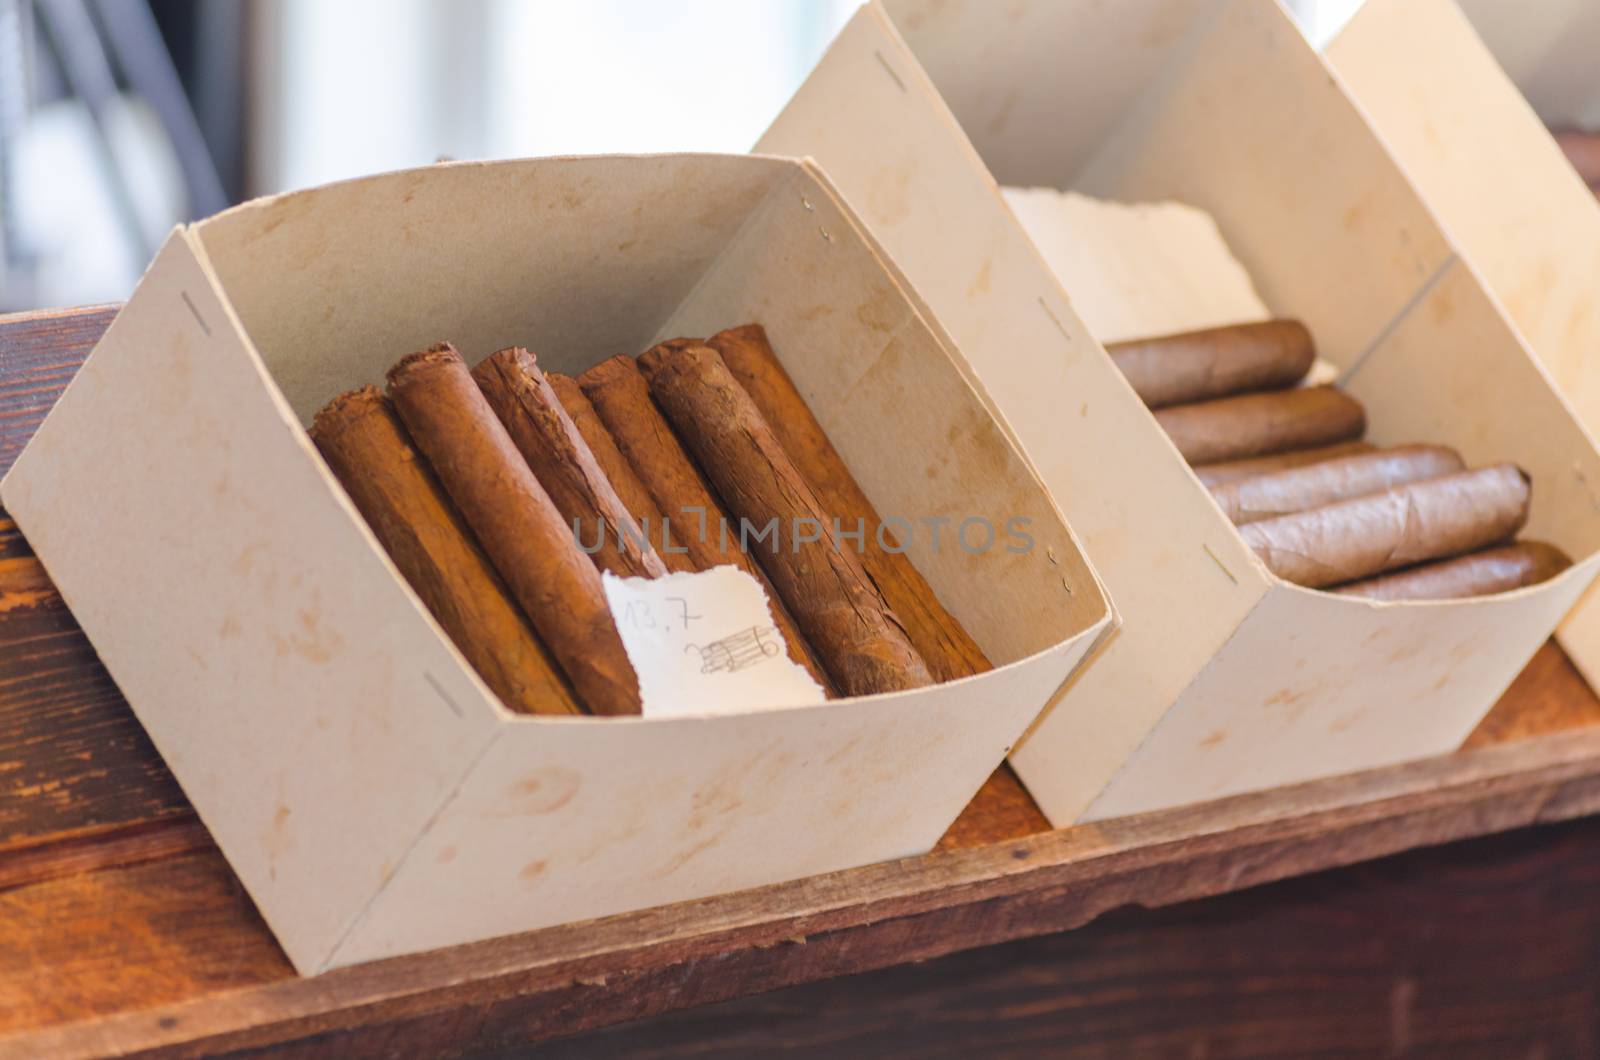 A box full of home-made cigars.